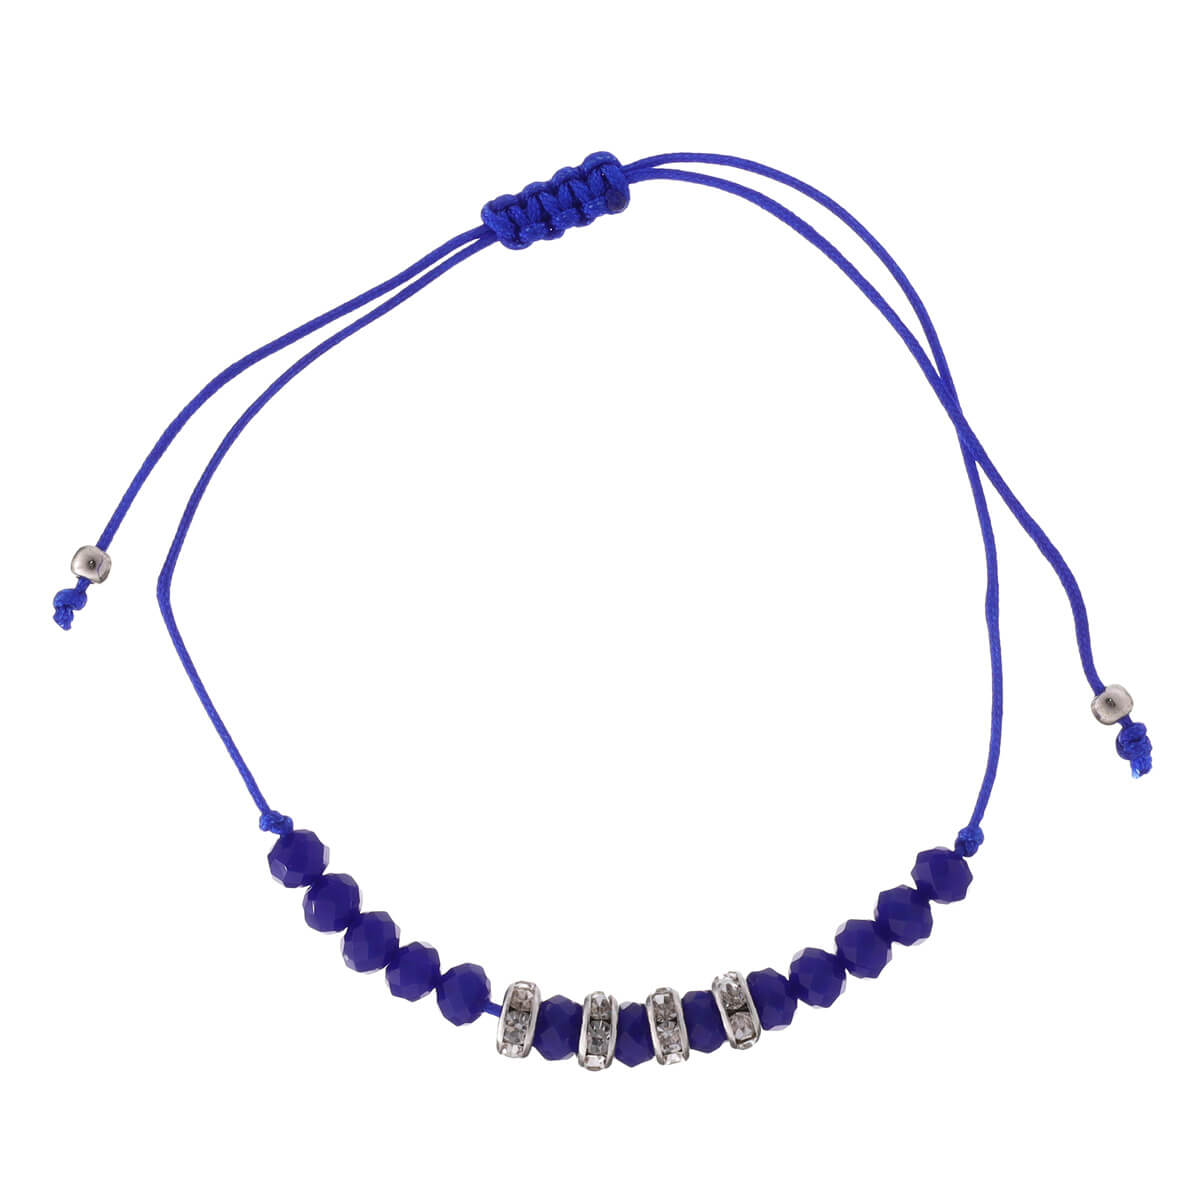 A thin bracelet with glass beads